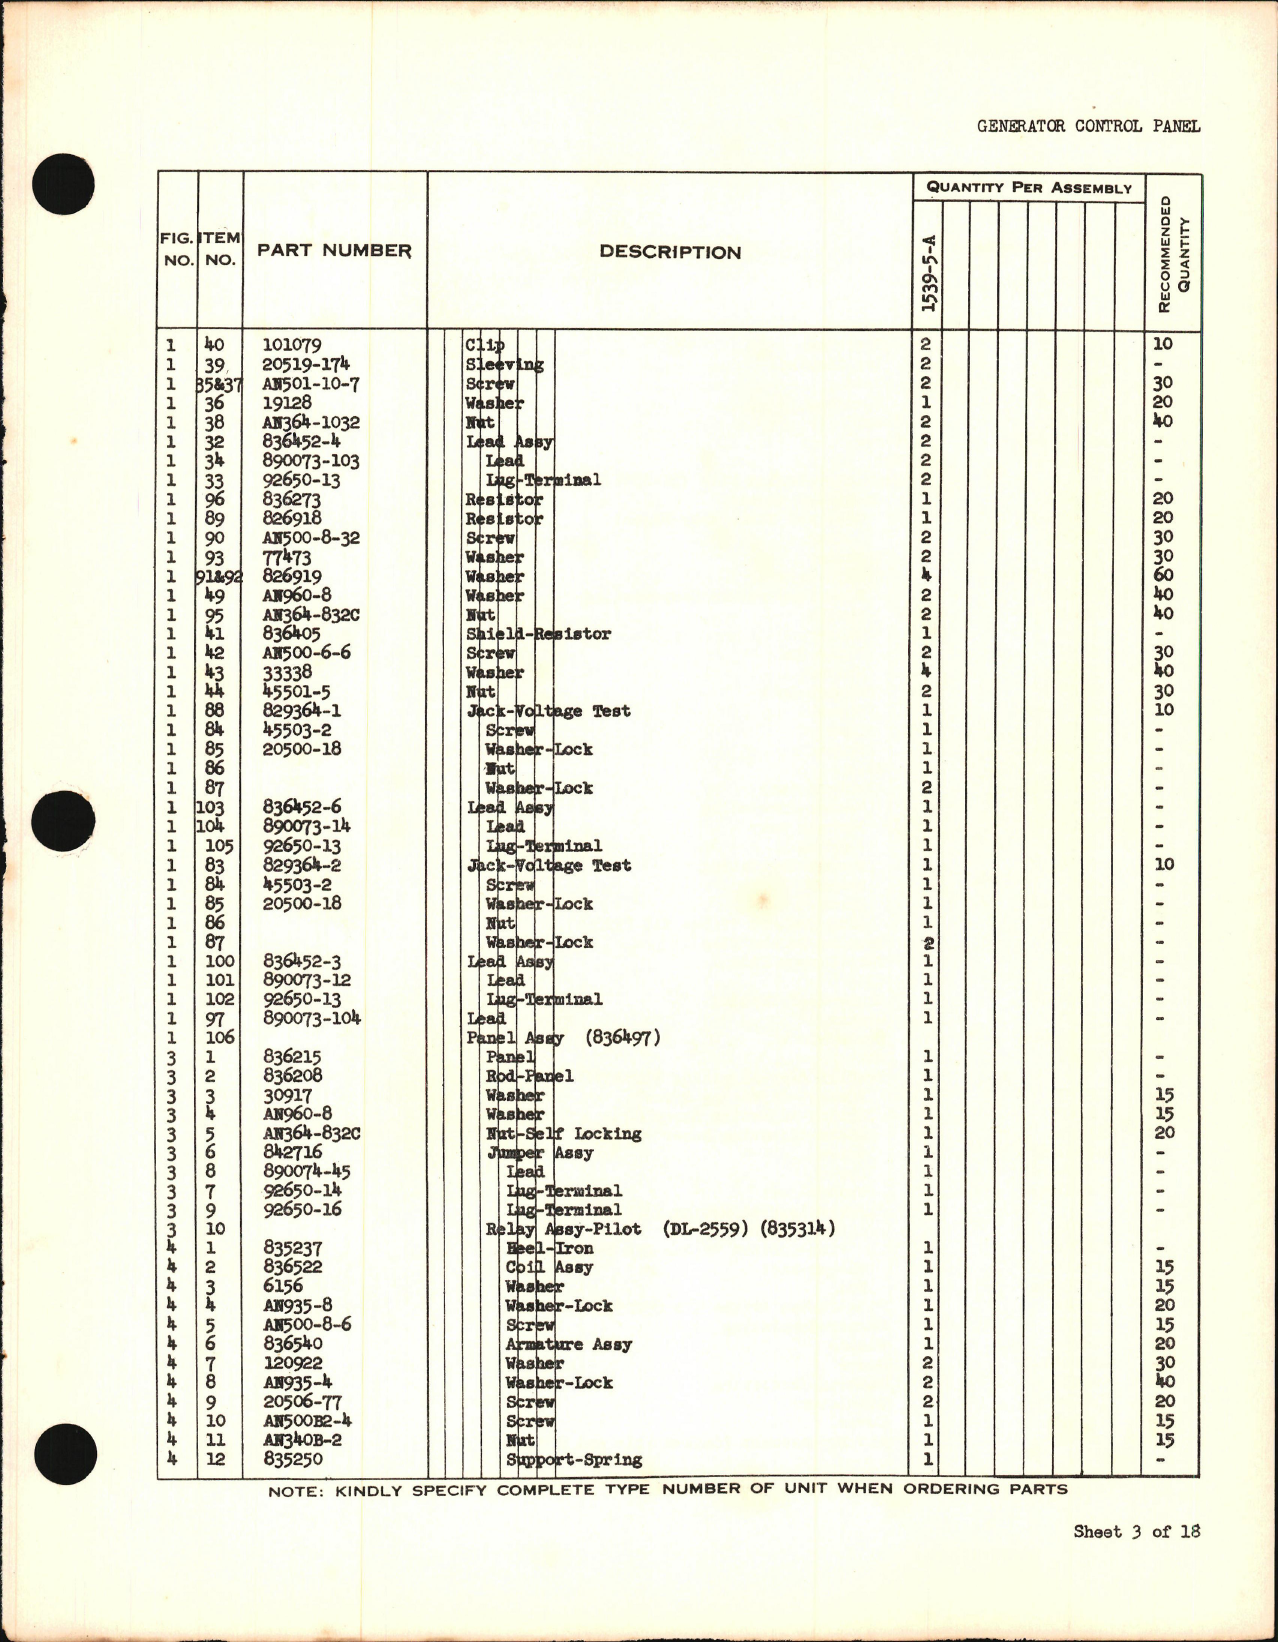 Sample page 5 from AirCorps Library document: Service Parts List for Generator Control Panel Type 1539-5, -7, -8, and -9